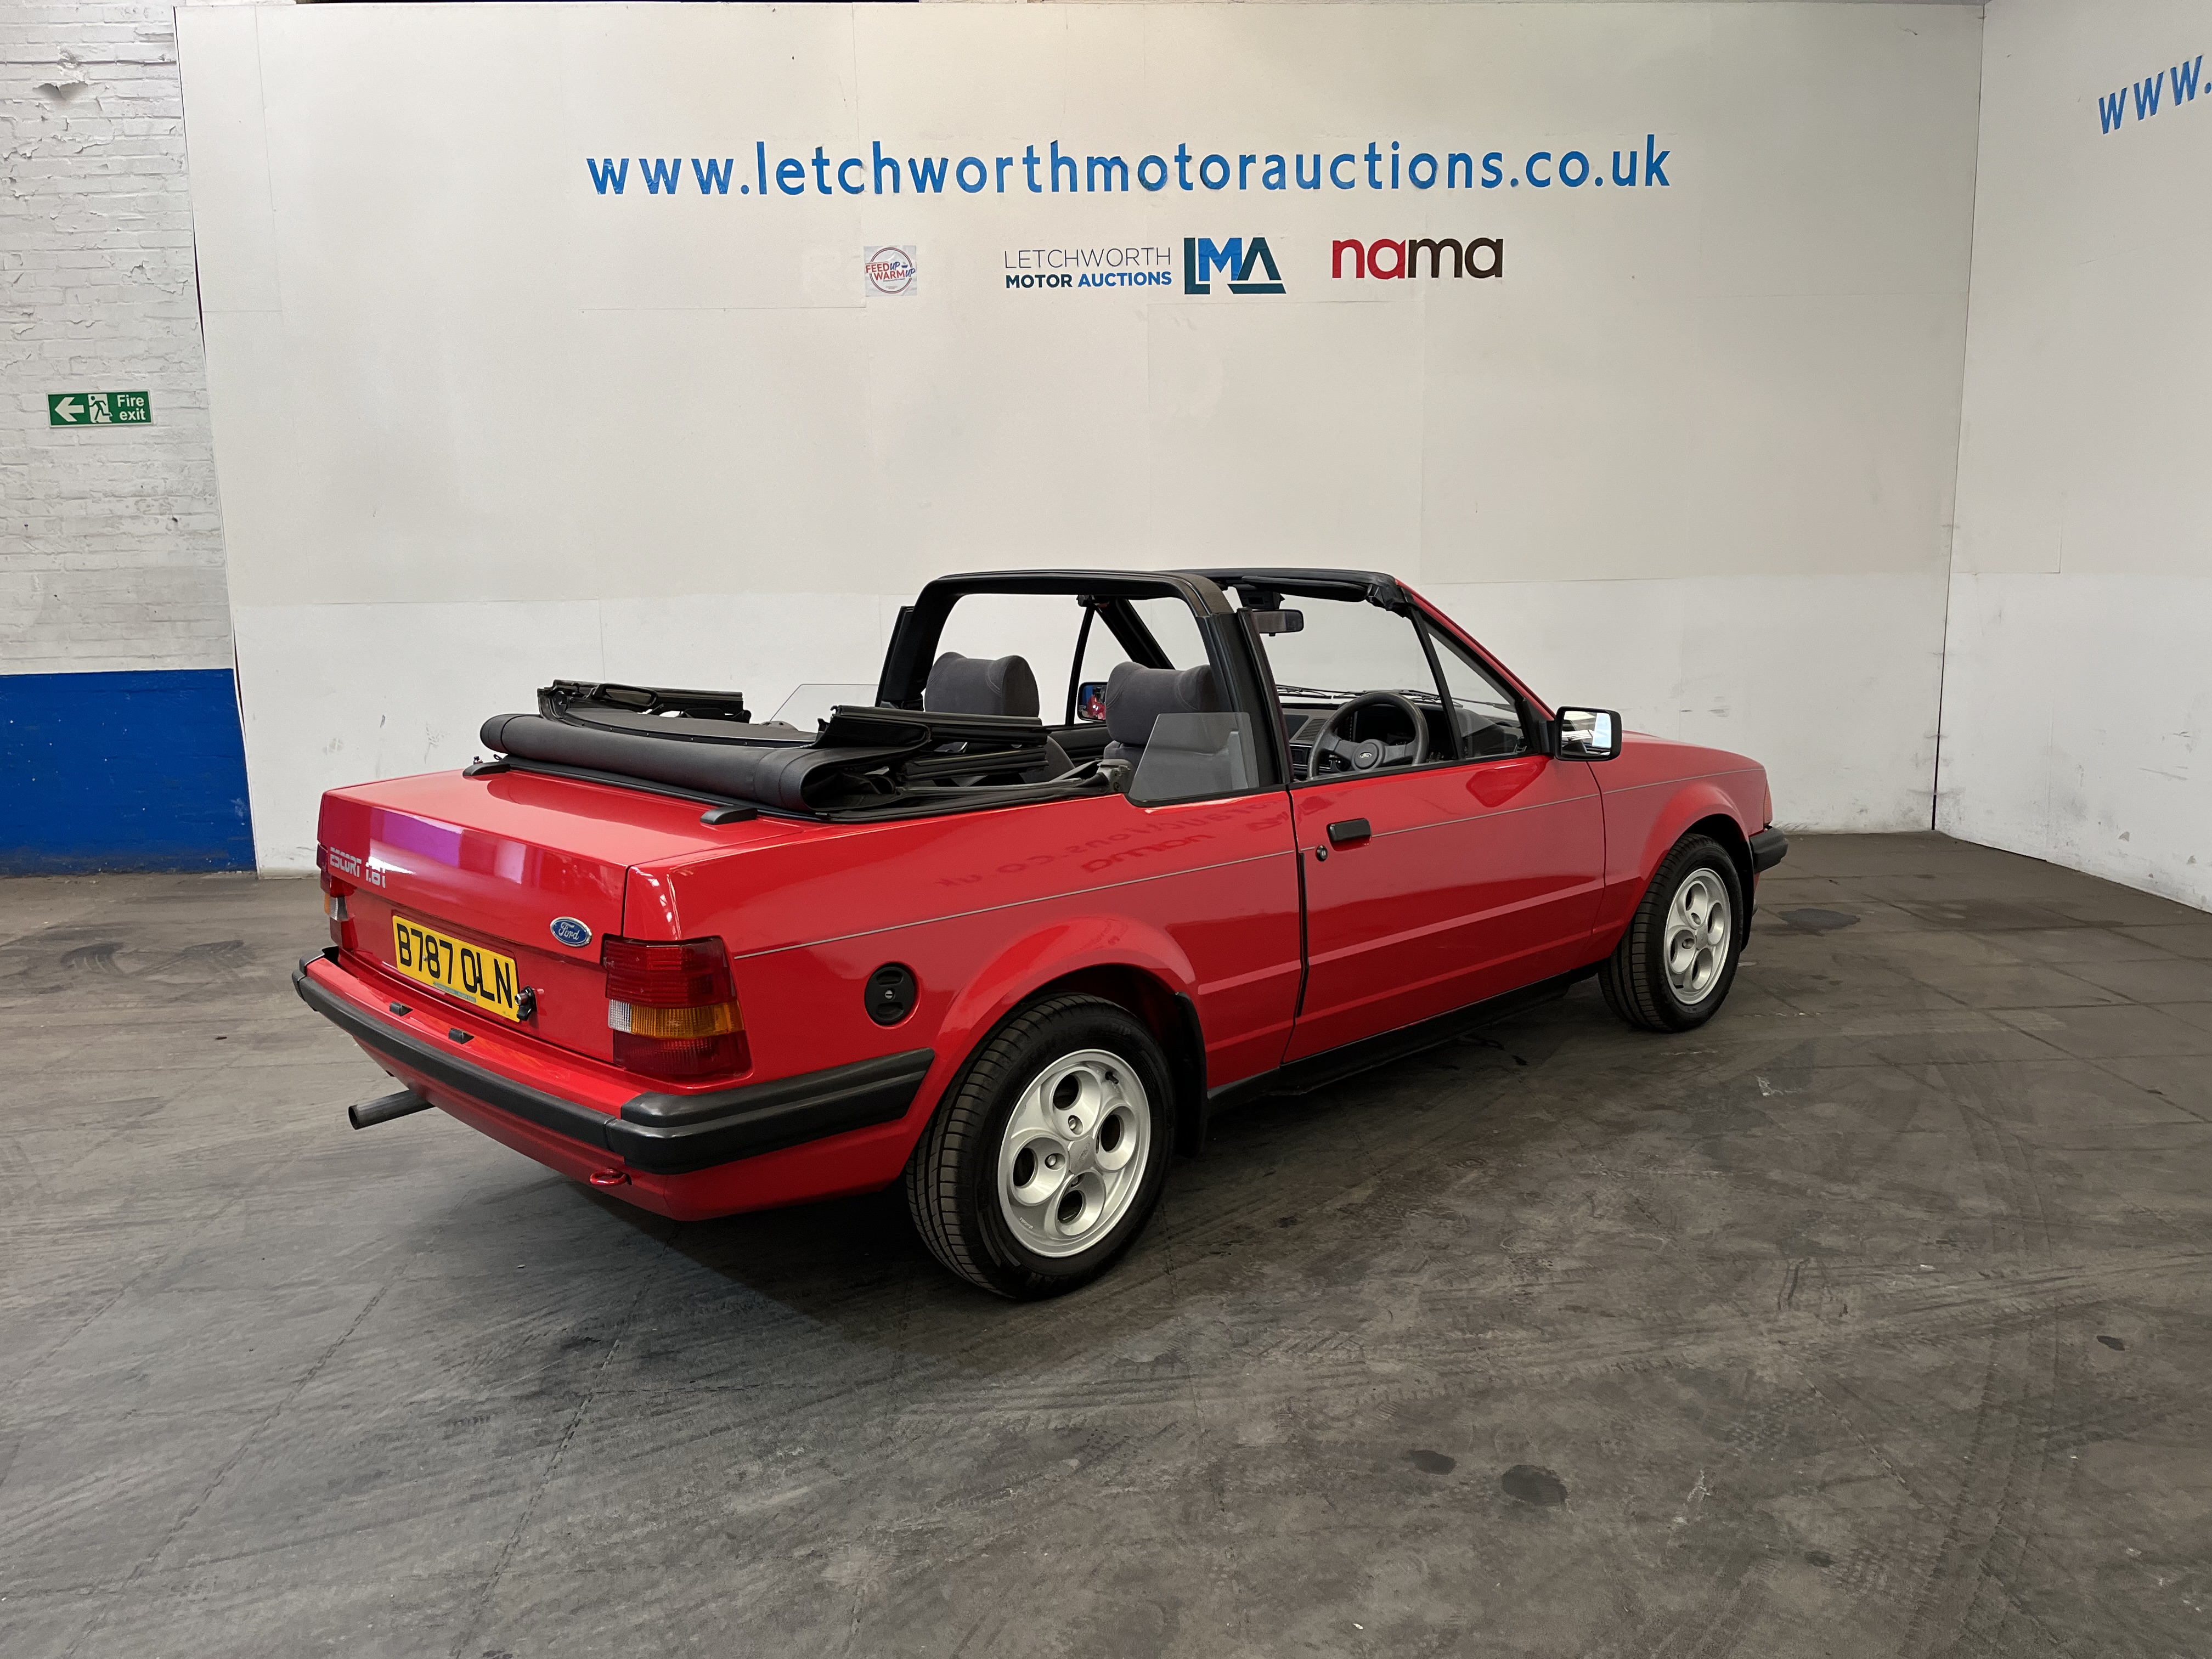 1985 Ford Escort 1.6i Cabriolet - 1597cc *ONE OWNER FROM NEW* - Image 12 of 24